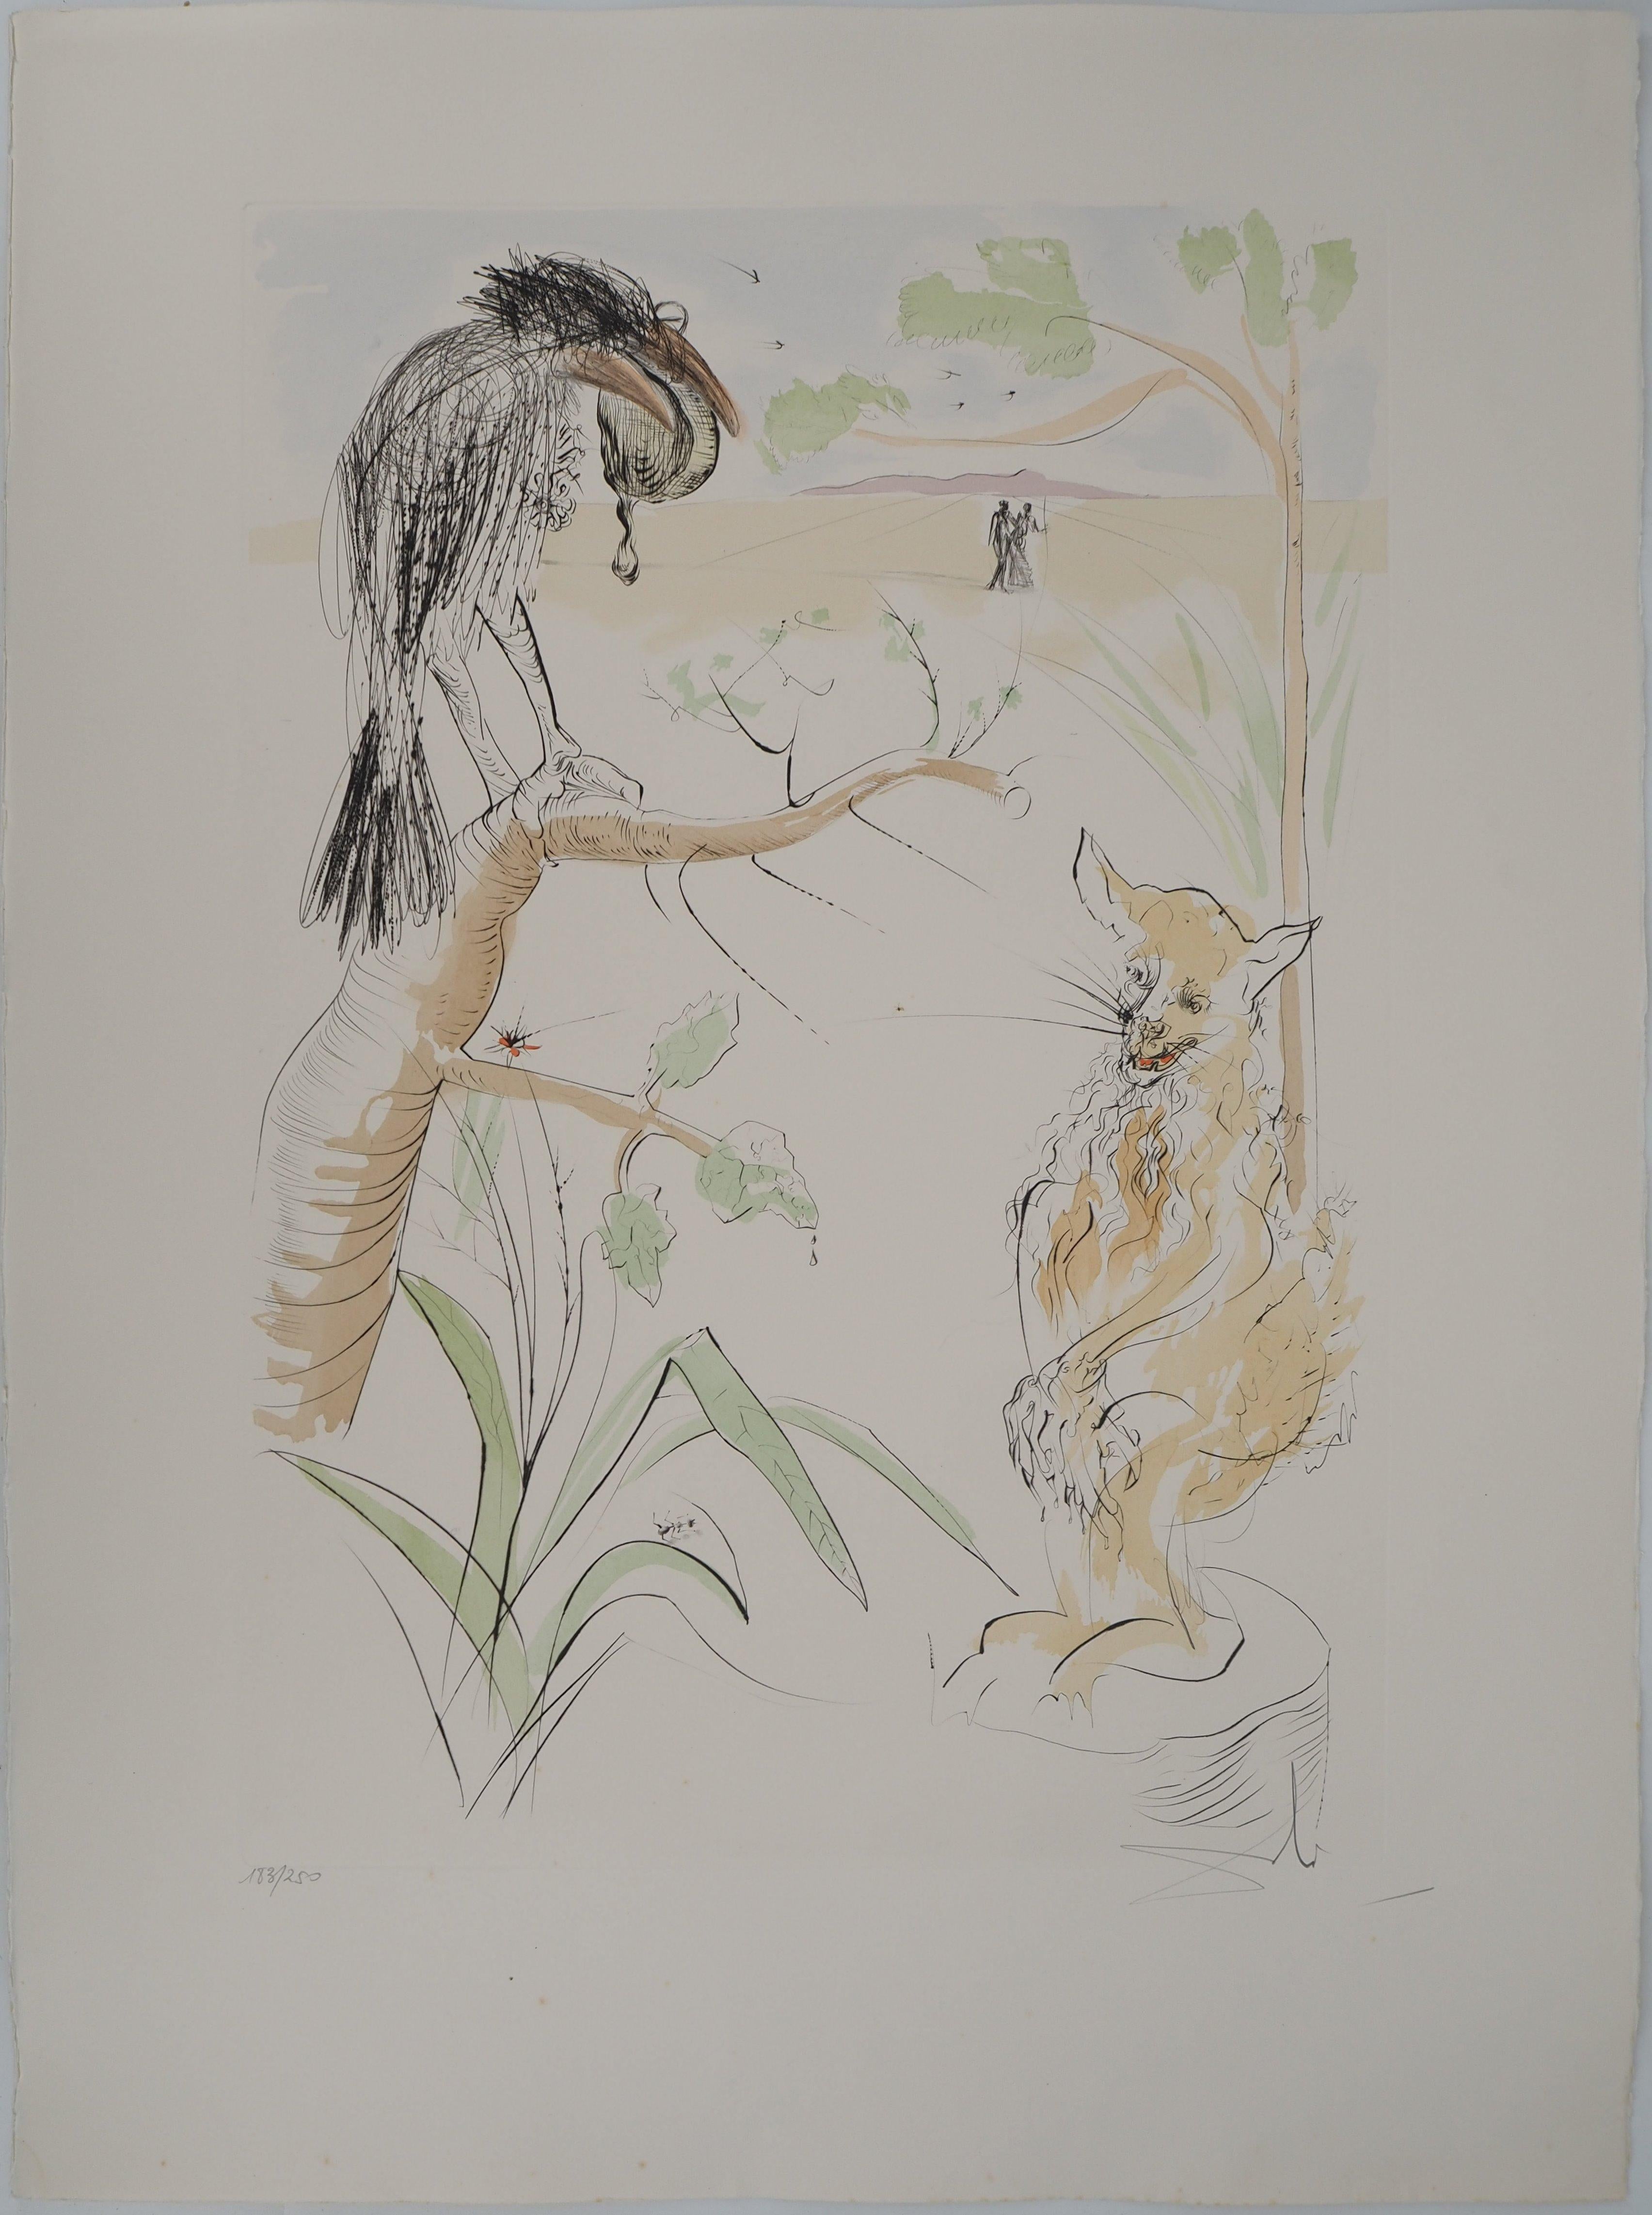 Salvador Dalí Animal Print - La Fontaine's Bestiary, The crow and the fox -Original etching, HANDSIGNED, 1974